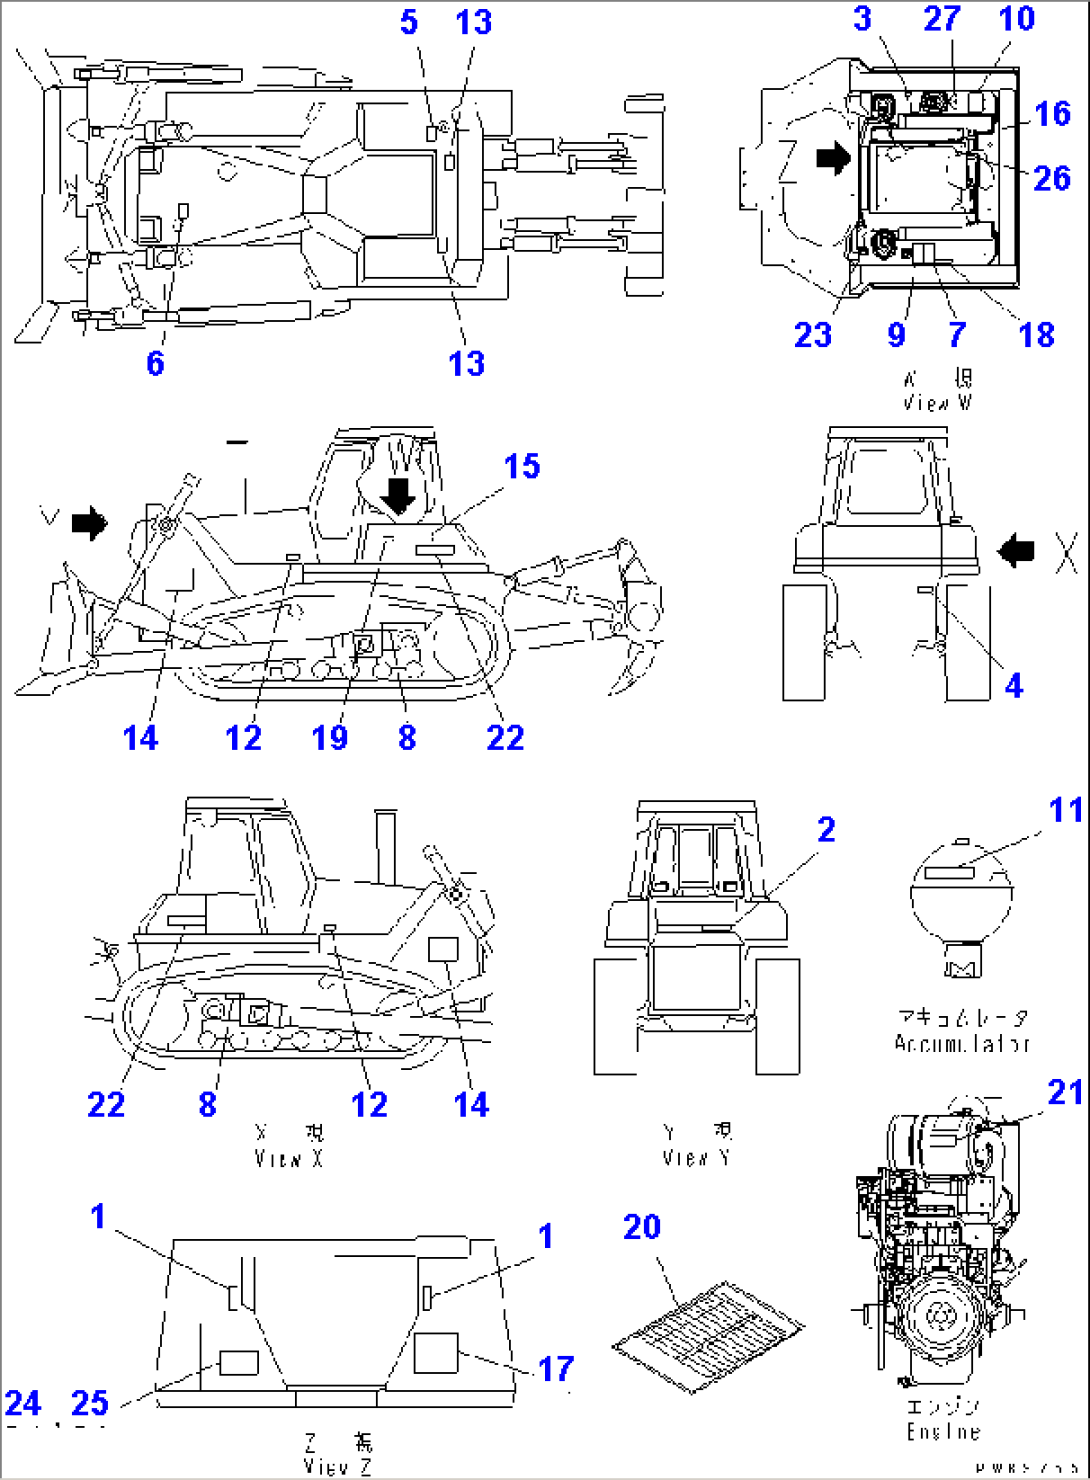 MARKS AND PLATES (CHINESE)(#70001-74999)